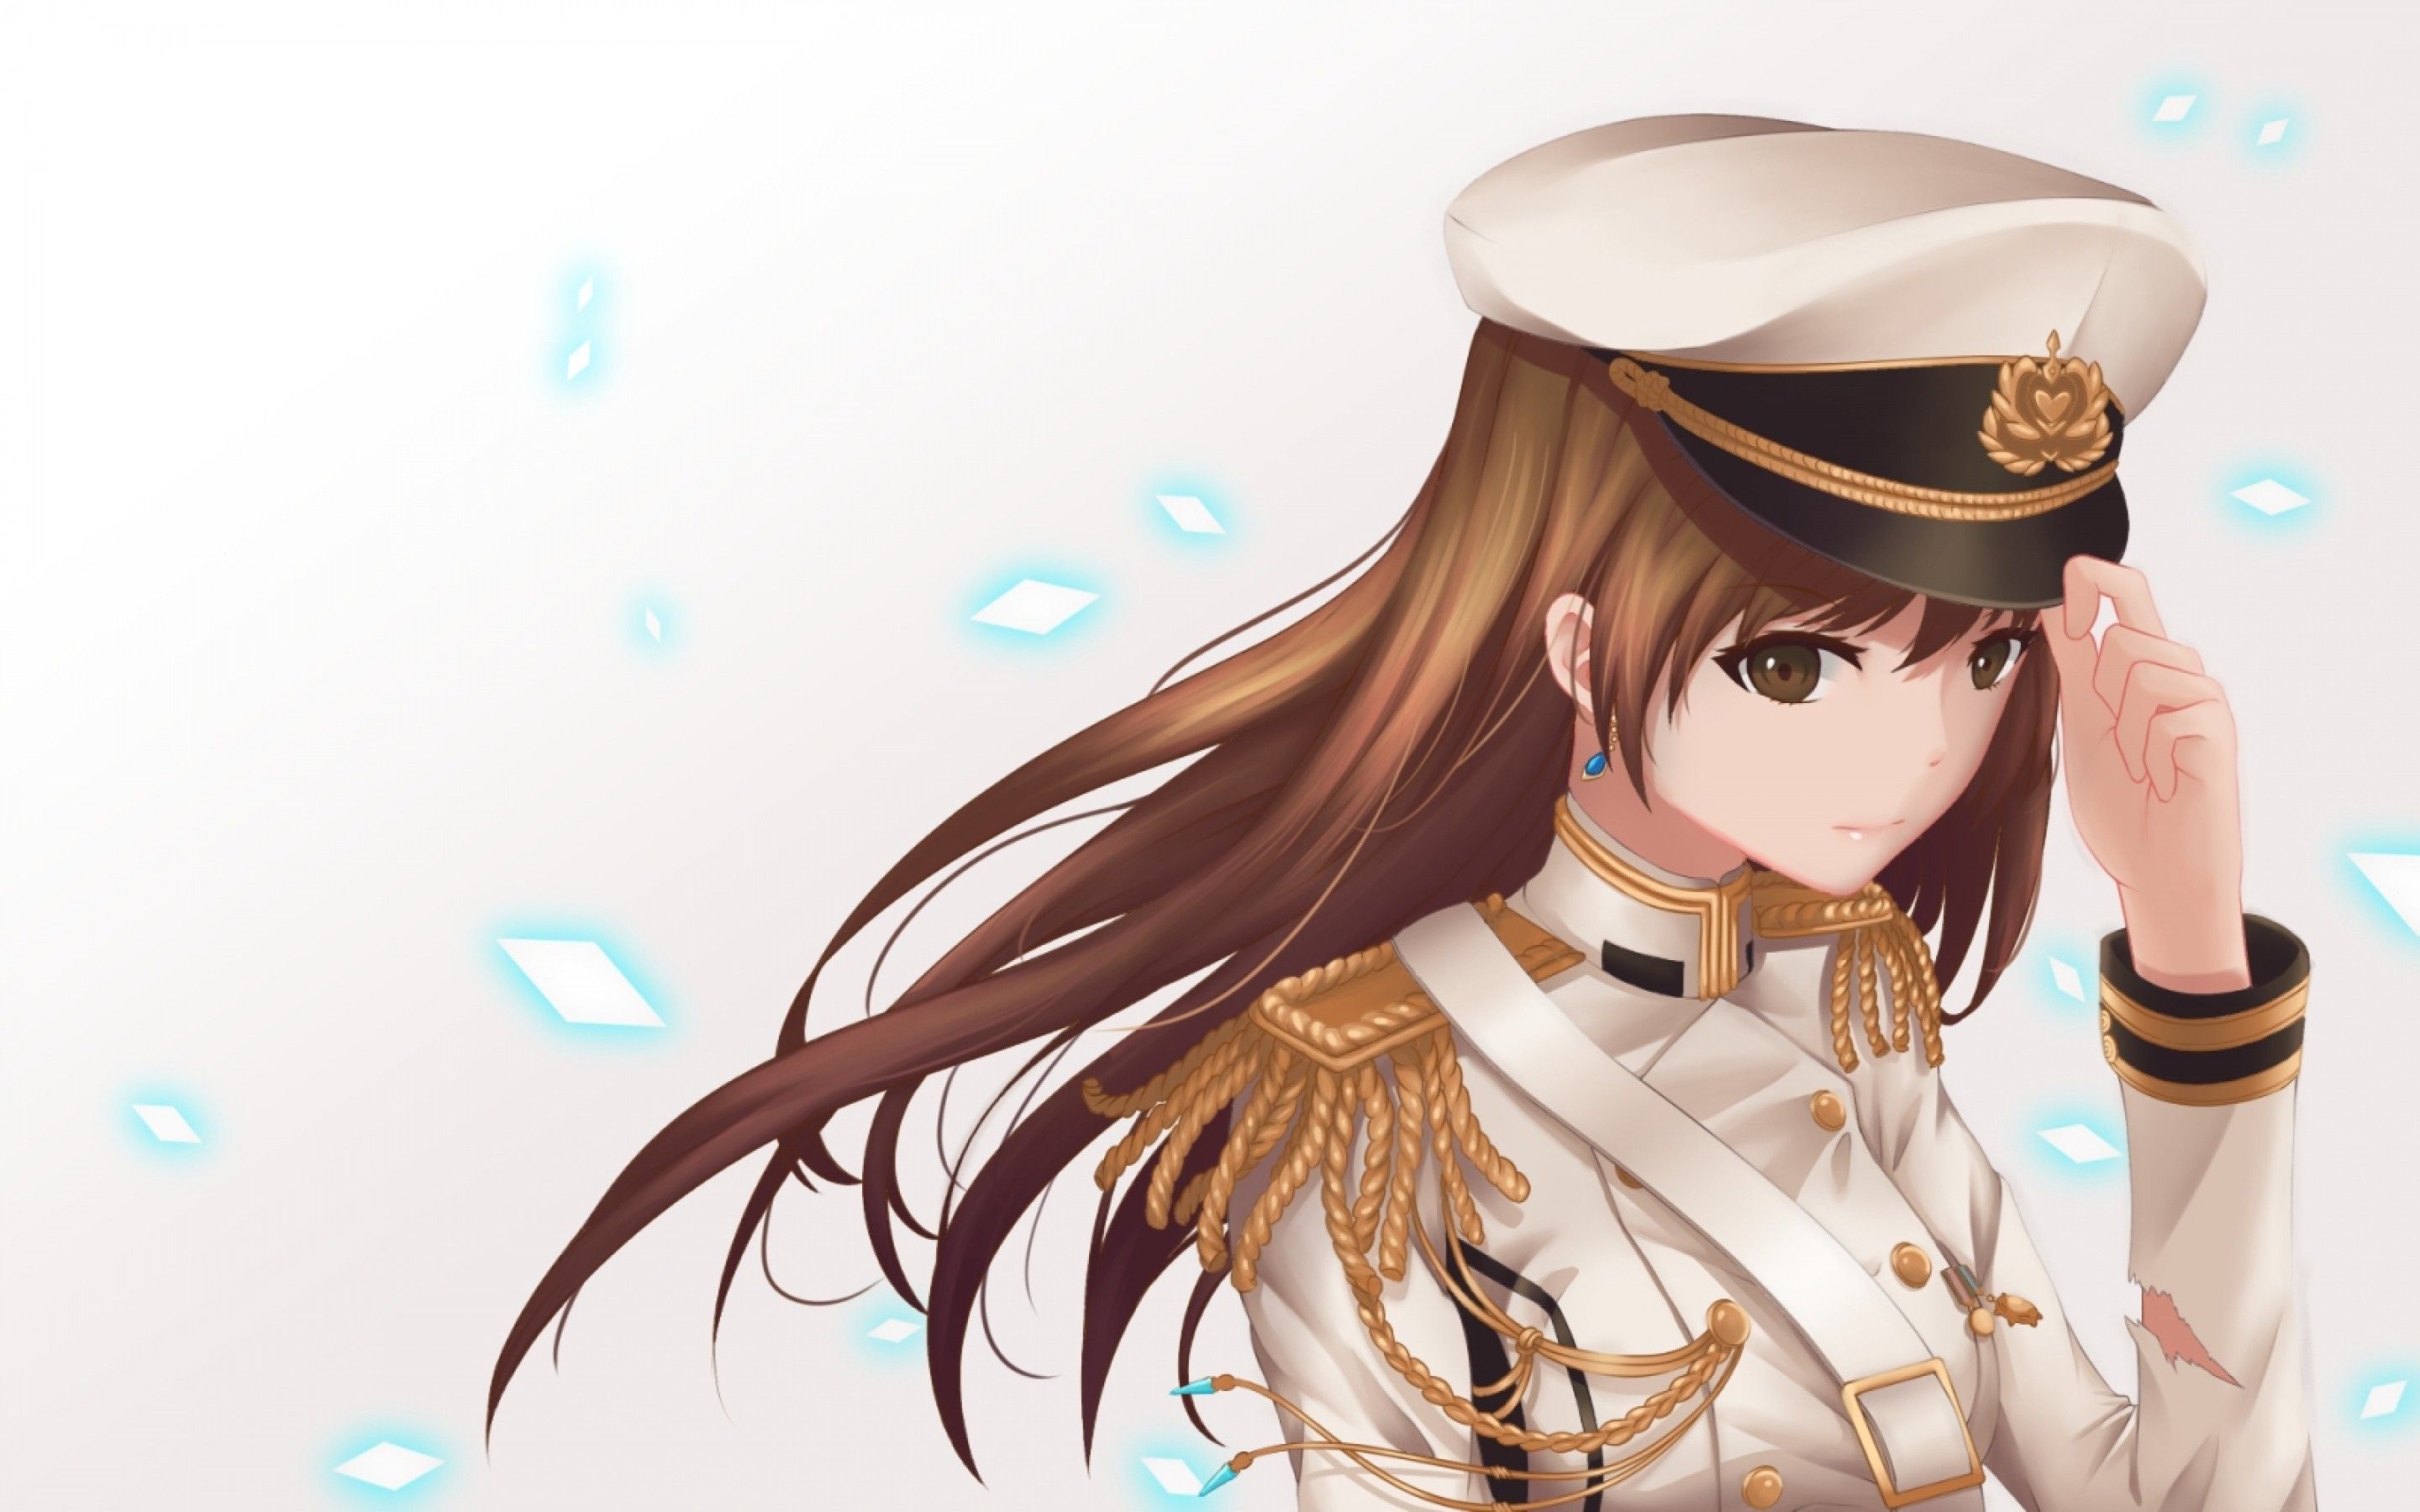 Military Uniform Girl Anime Wallpapers - Wallpaper Cave